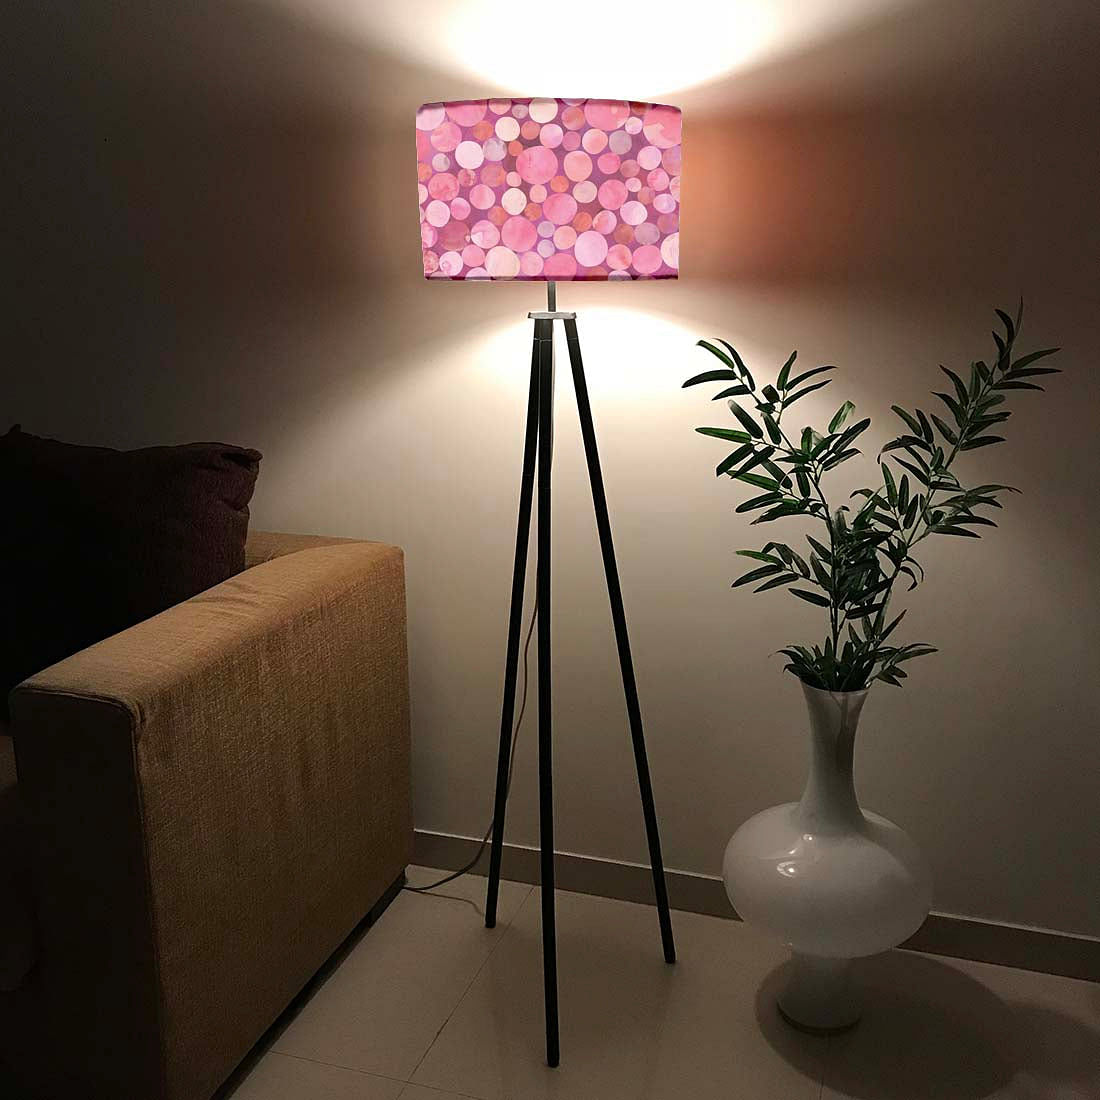 Tripod Floor Lamp Standing Light for Living Rooms -Pink Confetti Nutcase